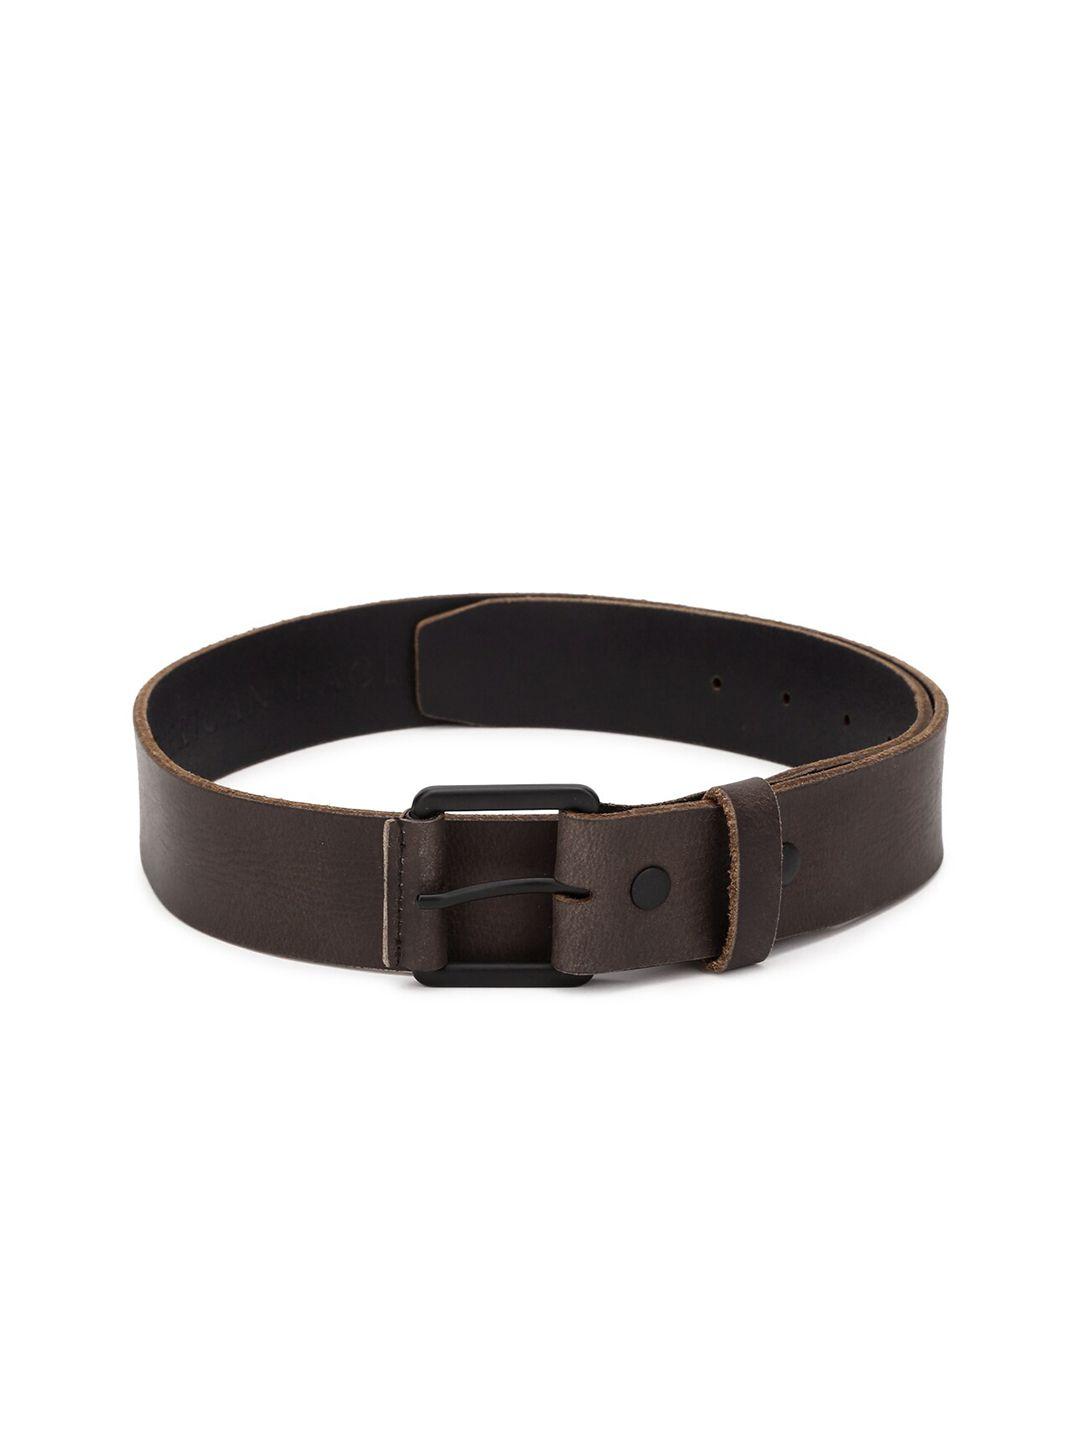 american eagle outfitters men brown textured leather belt